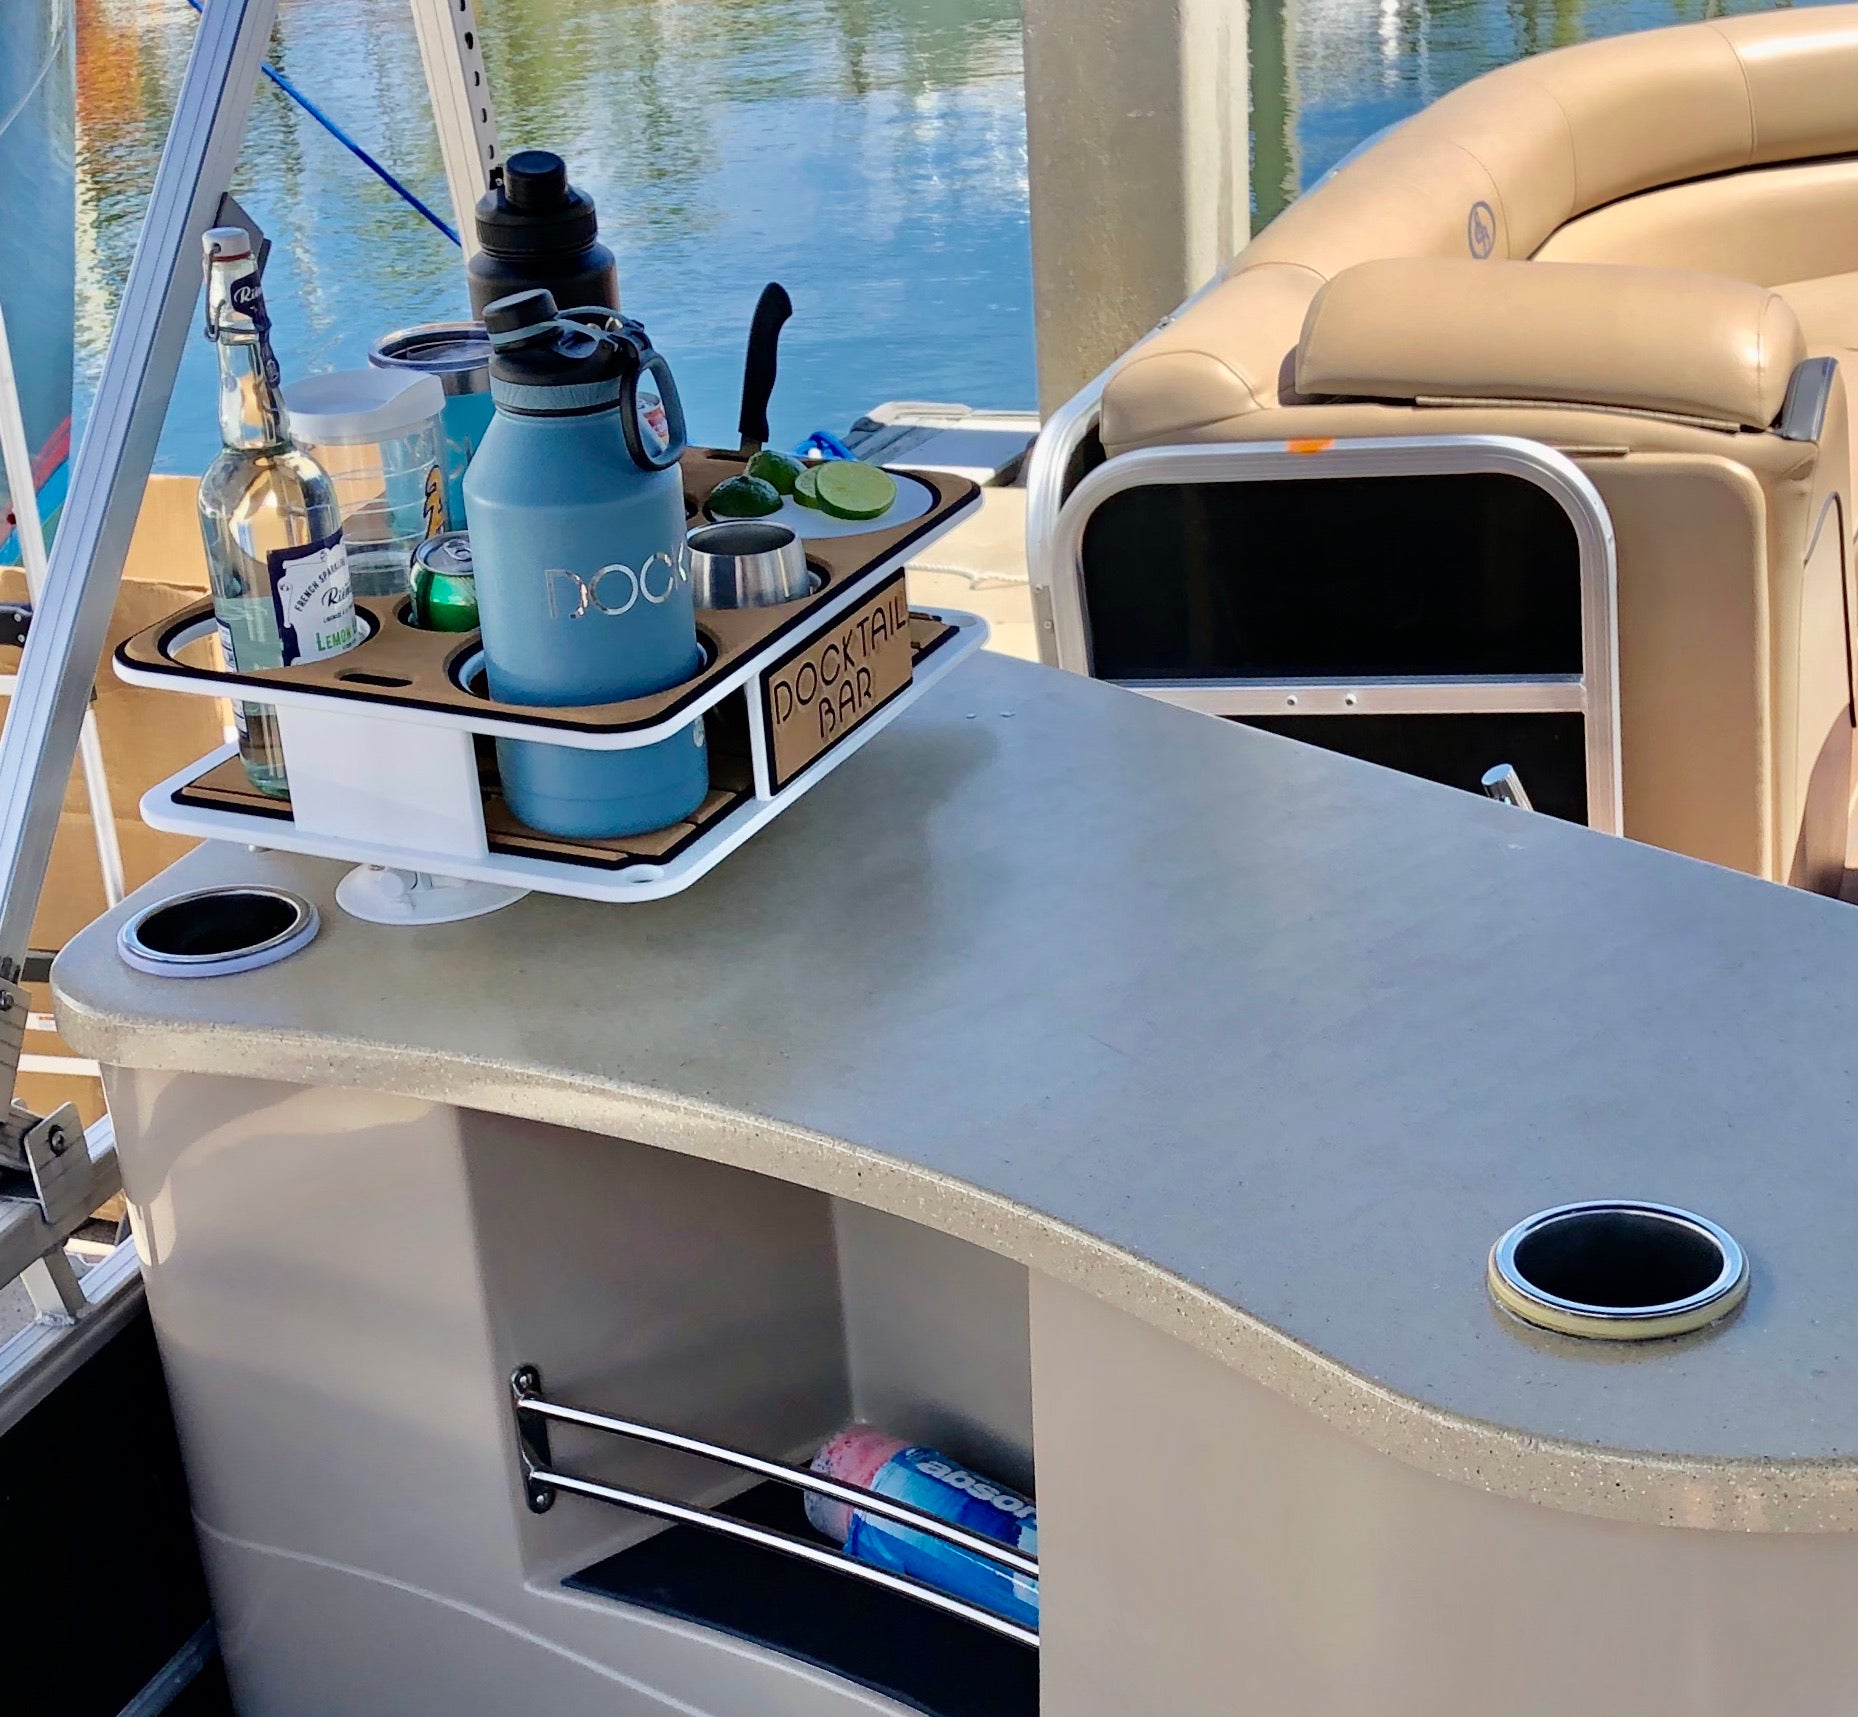 Docktail Boat Table and Cup Holder Caddy with SeaSucker Suction Mounts